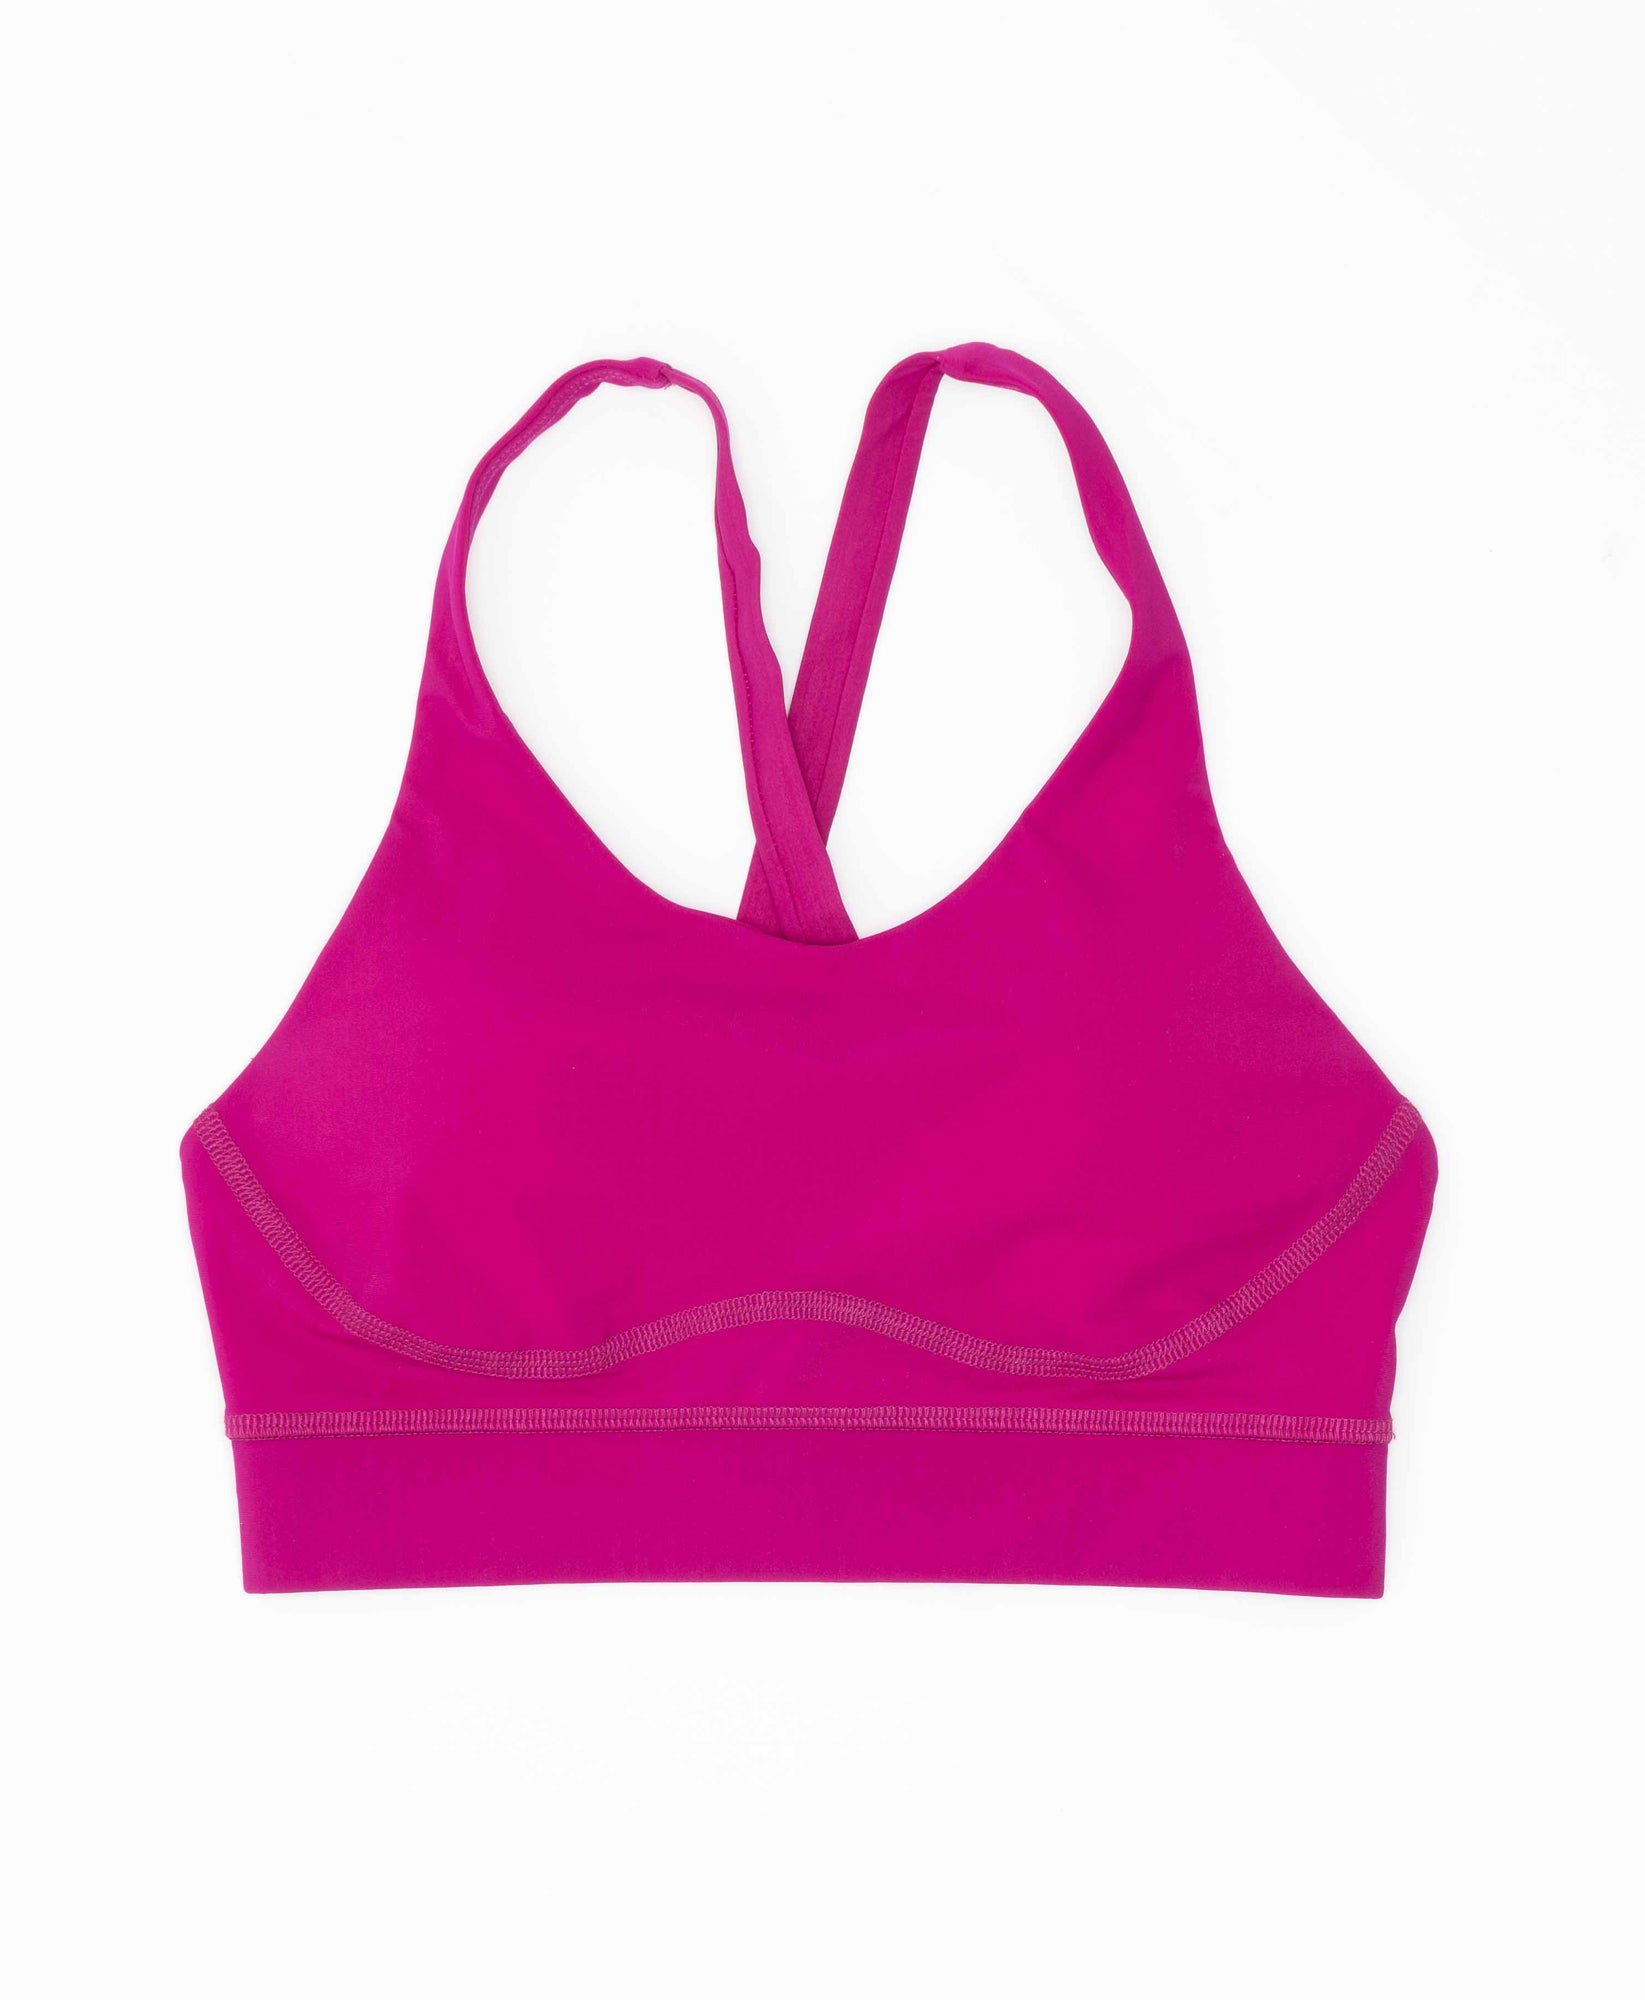 Shop All Wear One's At Bras in Crossback, Racerback, and More